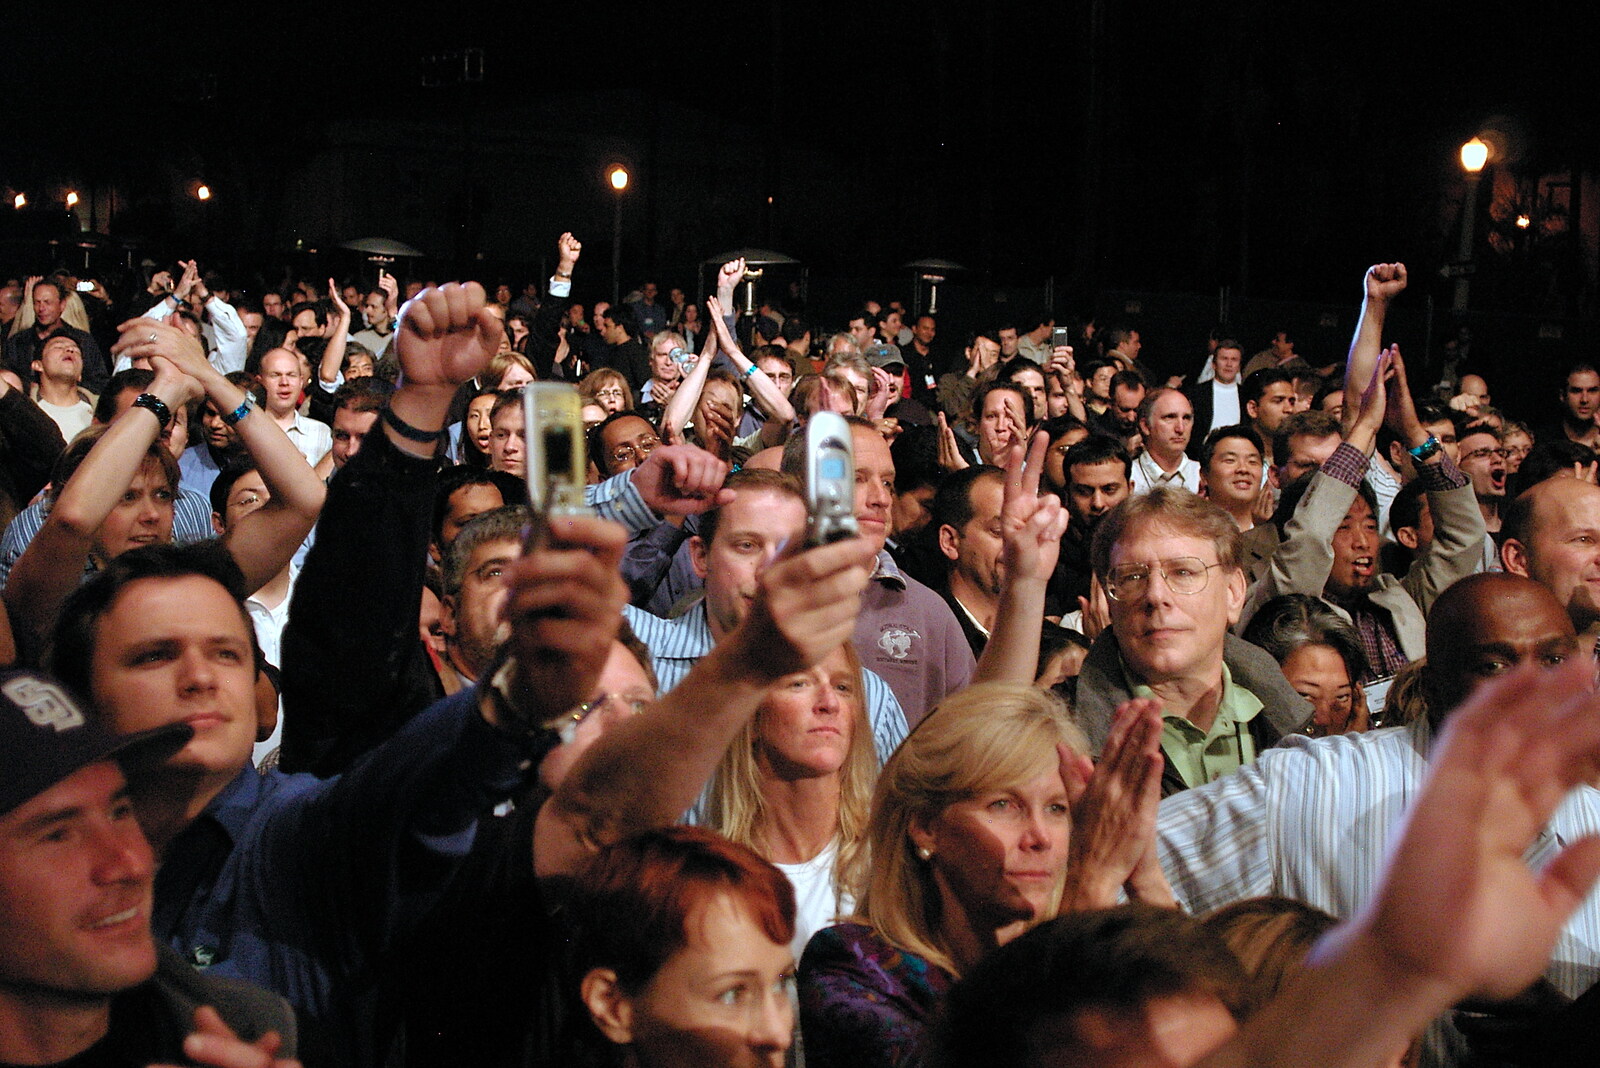 It's the dawn of mobile phone photos at gigs from BREW Fest and Huey Lewis and the News, Balboa Park, San Diego, California - 2nd June 2005